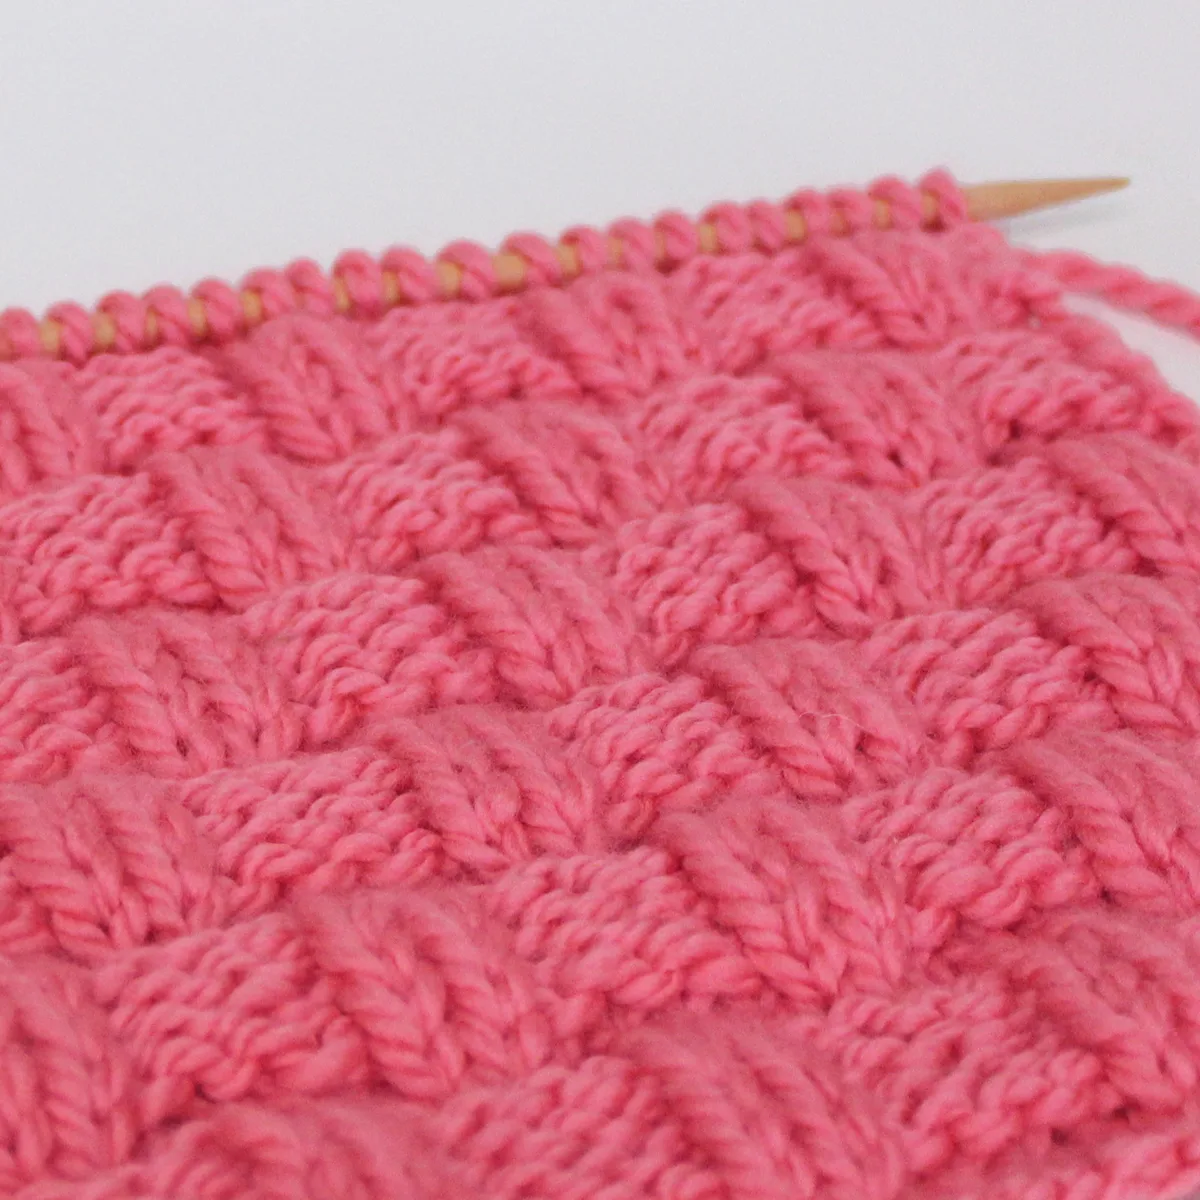 Knit stitch pattern in basket weave texture in pink yarn color on knitting needle.